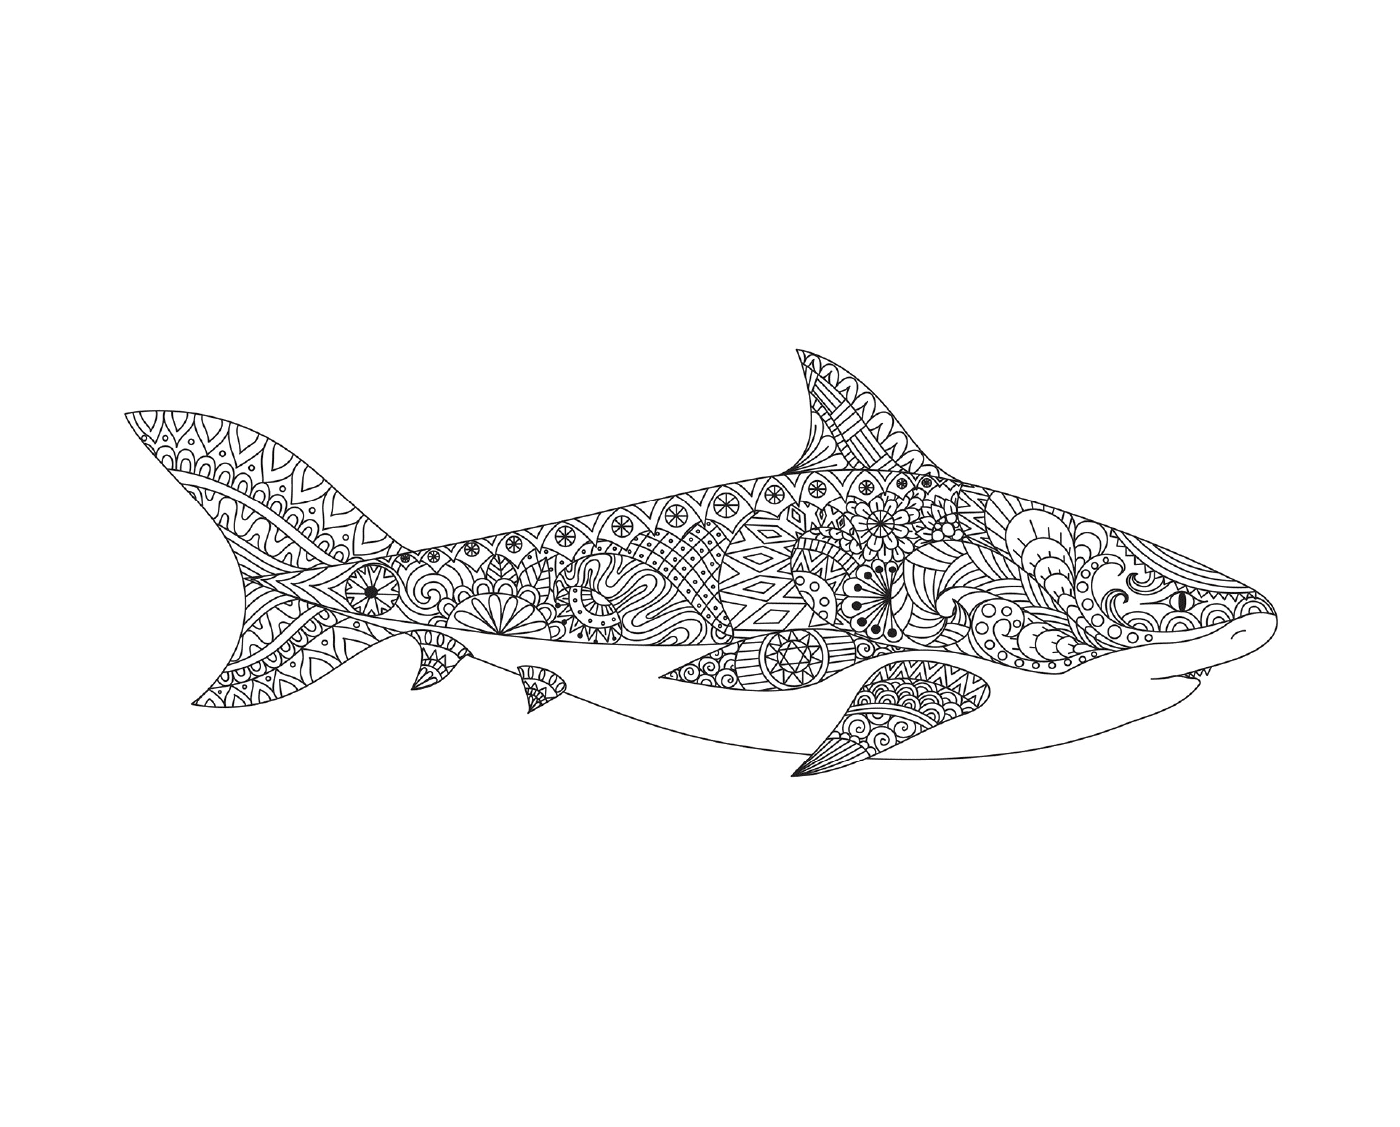  a tattooed representation of an adult shark with open mouth 